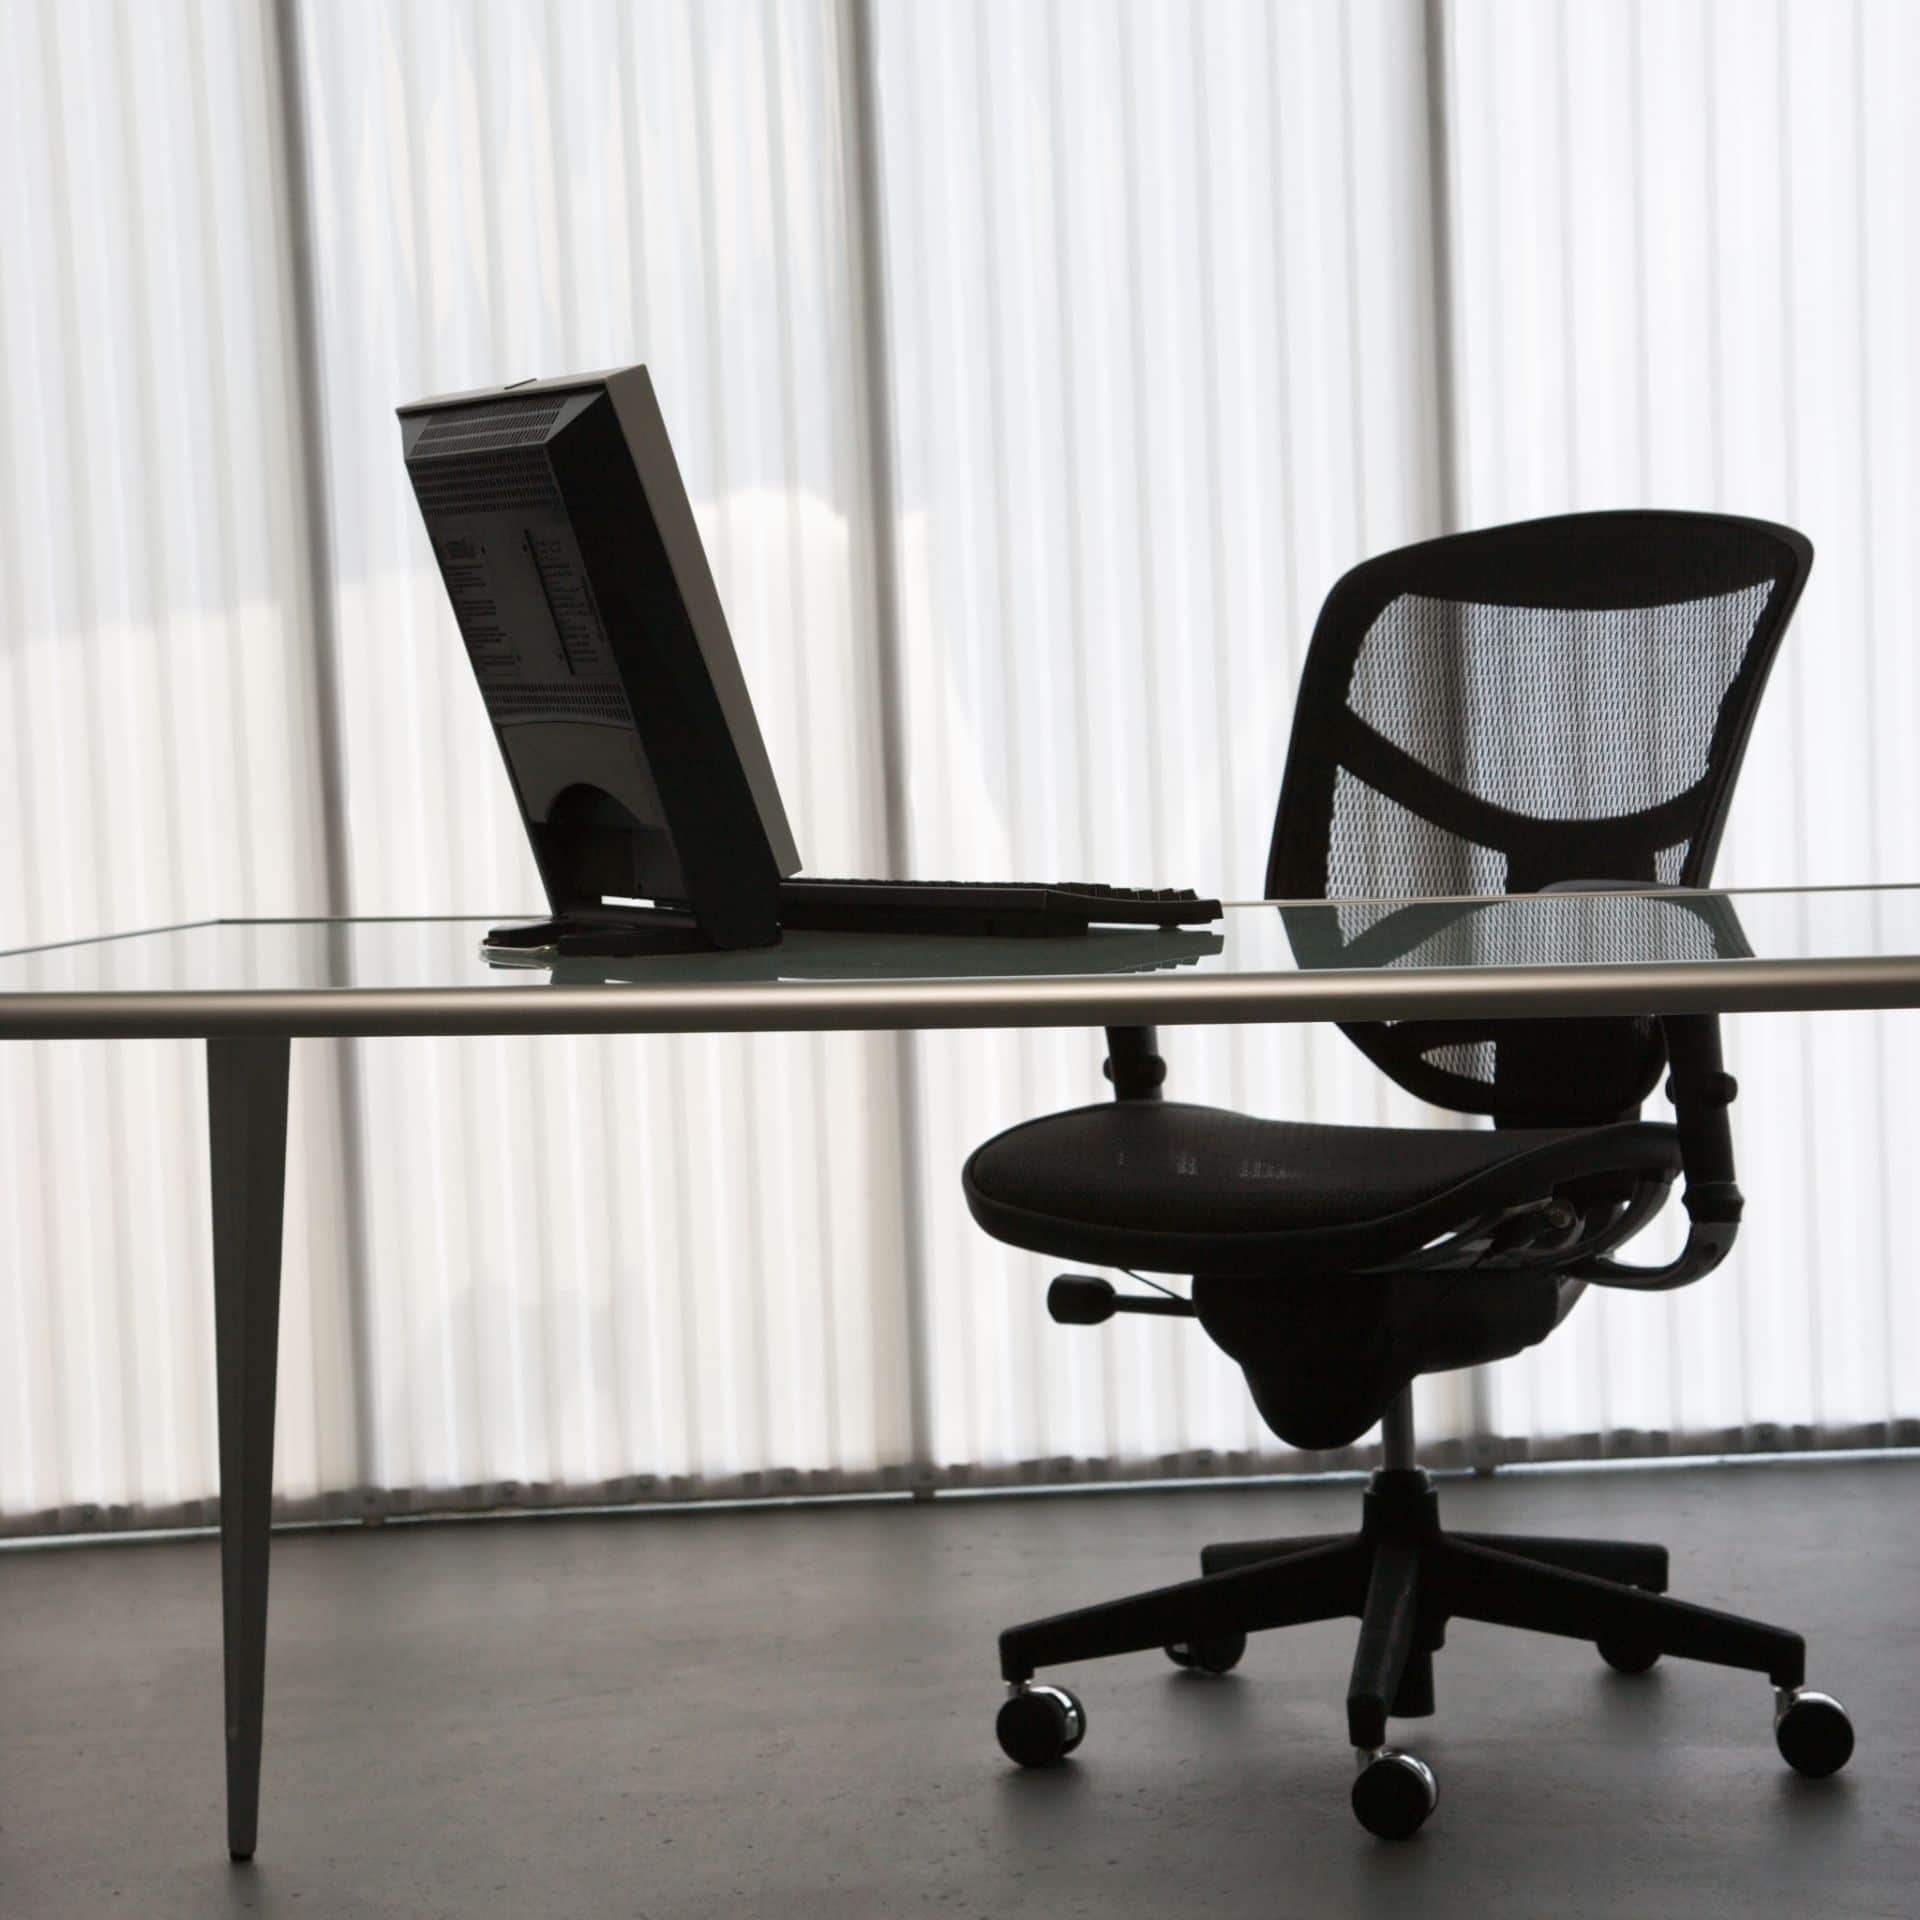 15 Best Office Chairs in 2022